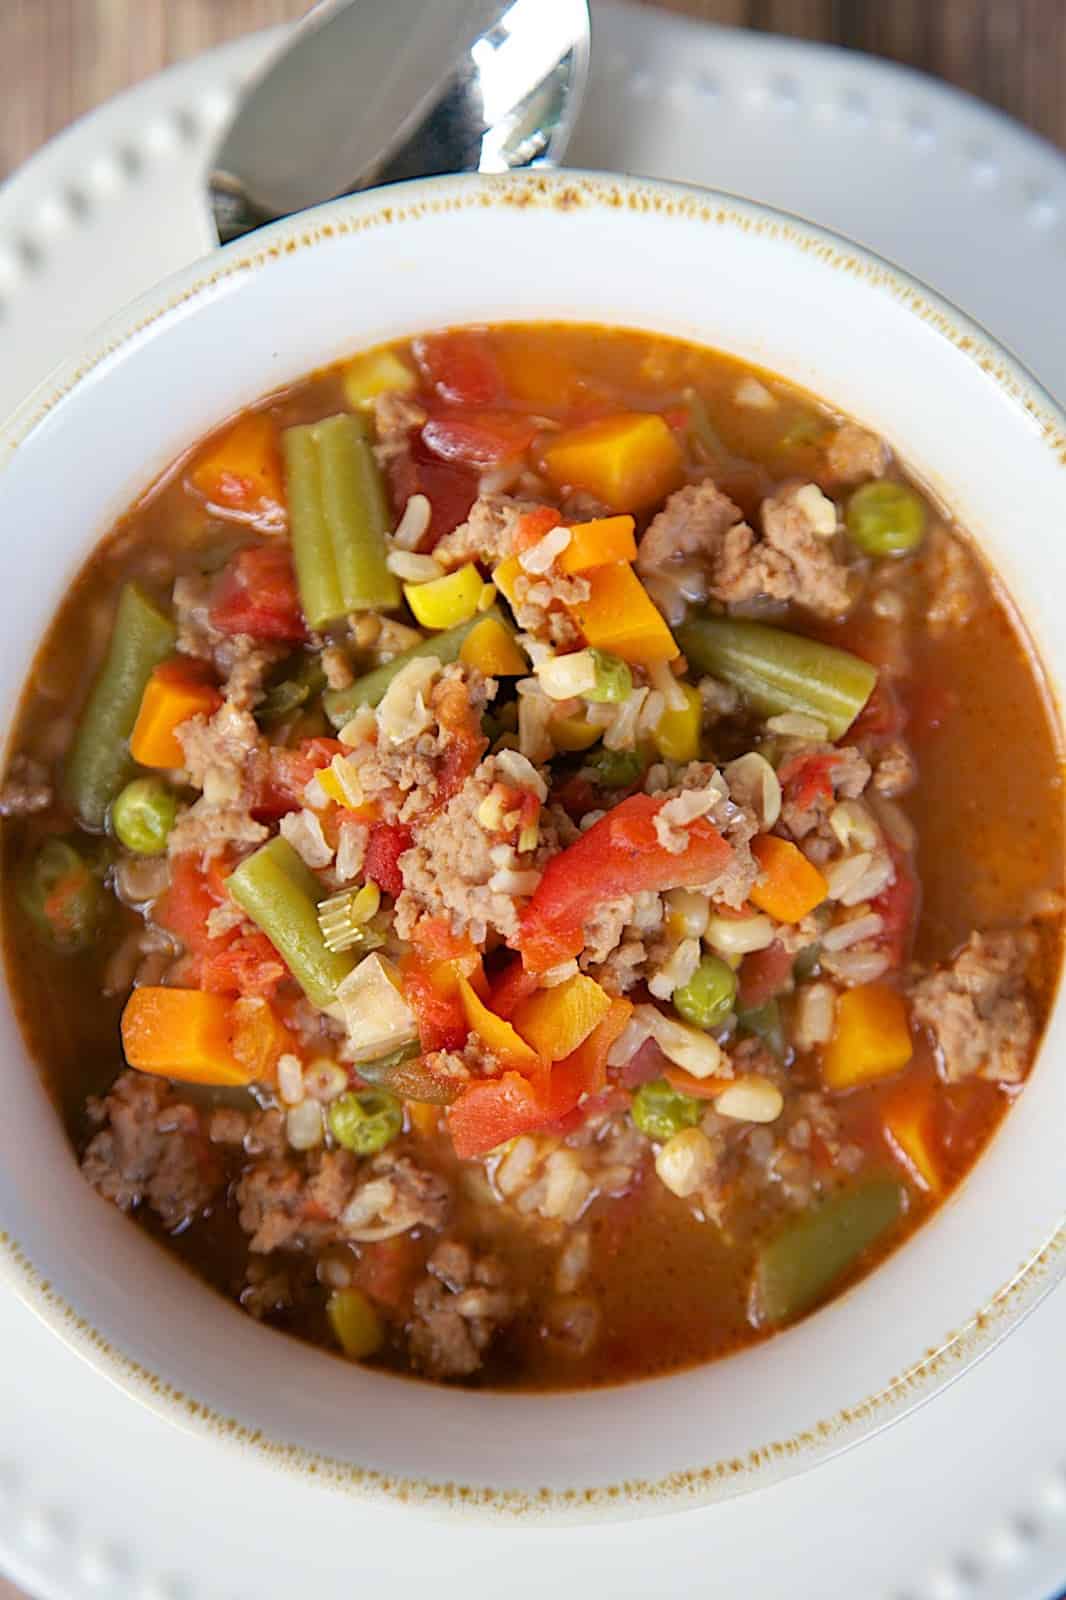 Turkey Vegetable Soup - ground turkey, mixed vegetables, beef broth and brown rice - ready in under 30 minutes. Leftovers are great for lunch and it freezes well. My husband gobbled this up! I've already made it 3 times this month!!